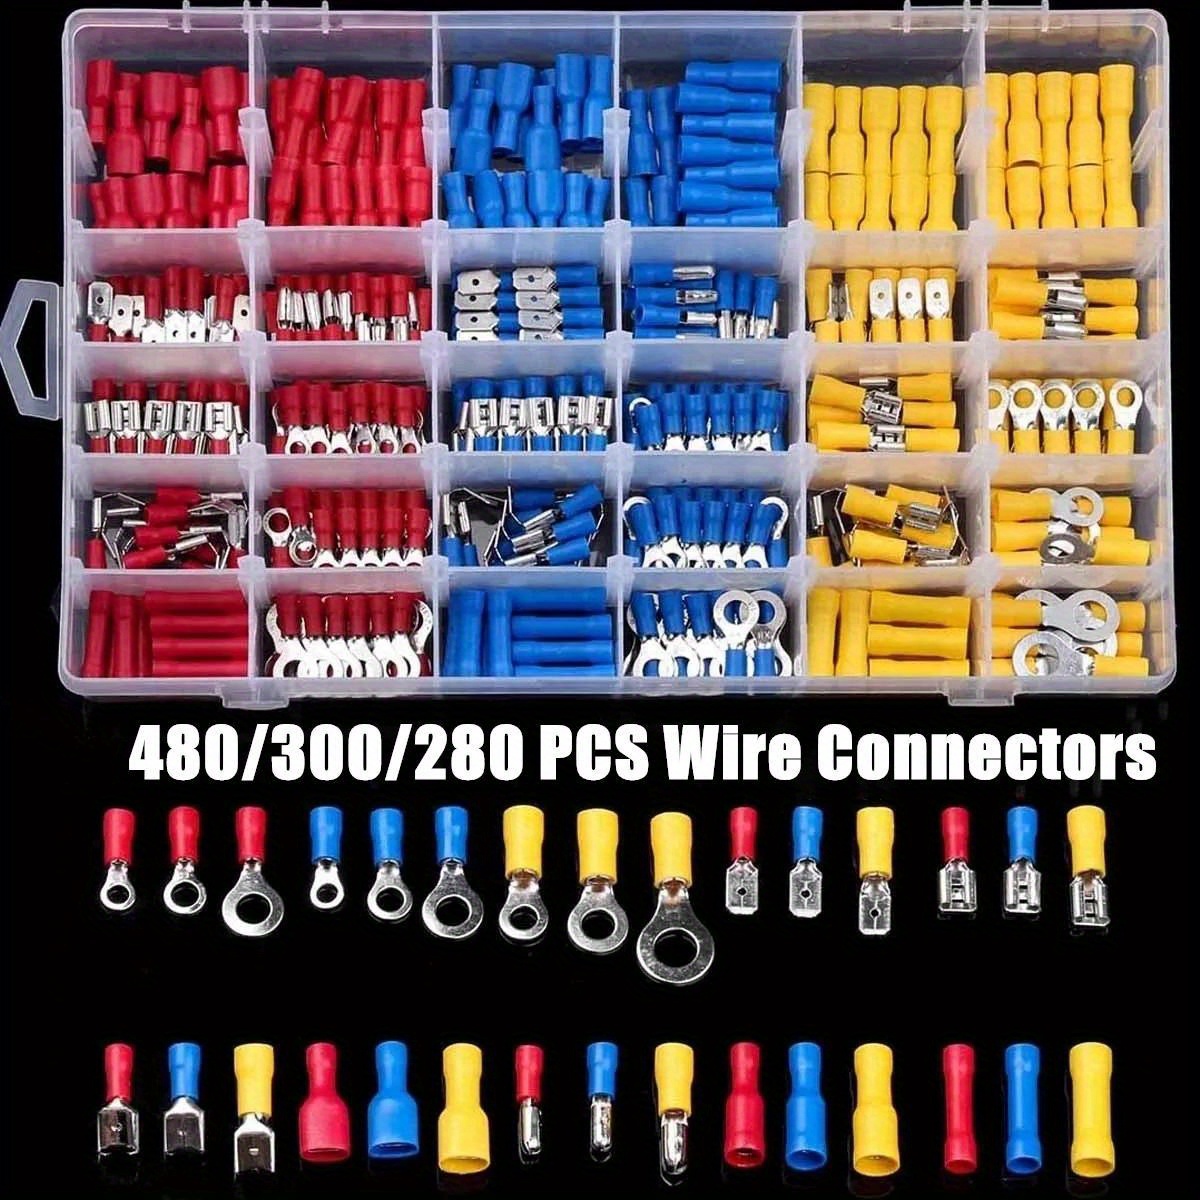 

280/300//480pcs Spade Crimp Wire Terminal, Assorted Insulated Cable Connector Electrical Wire Crimping Butting Auto Parts Kit Combination Box